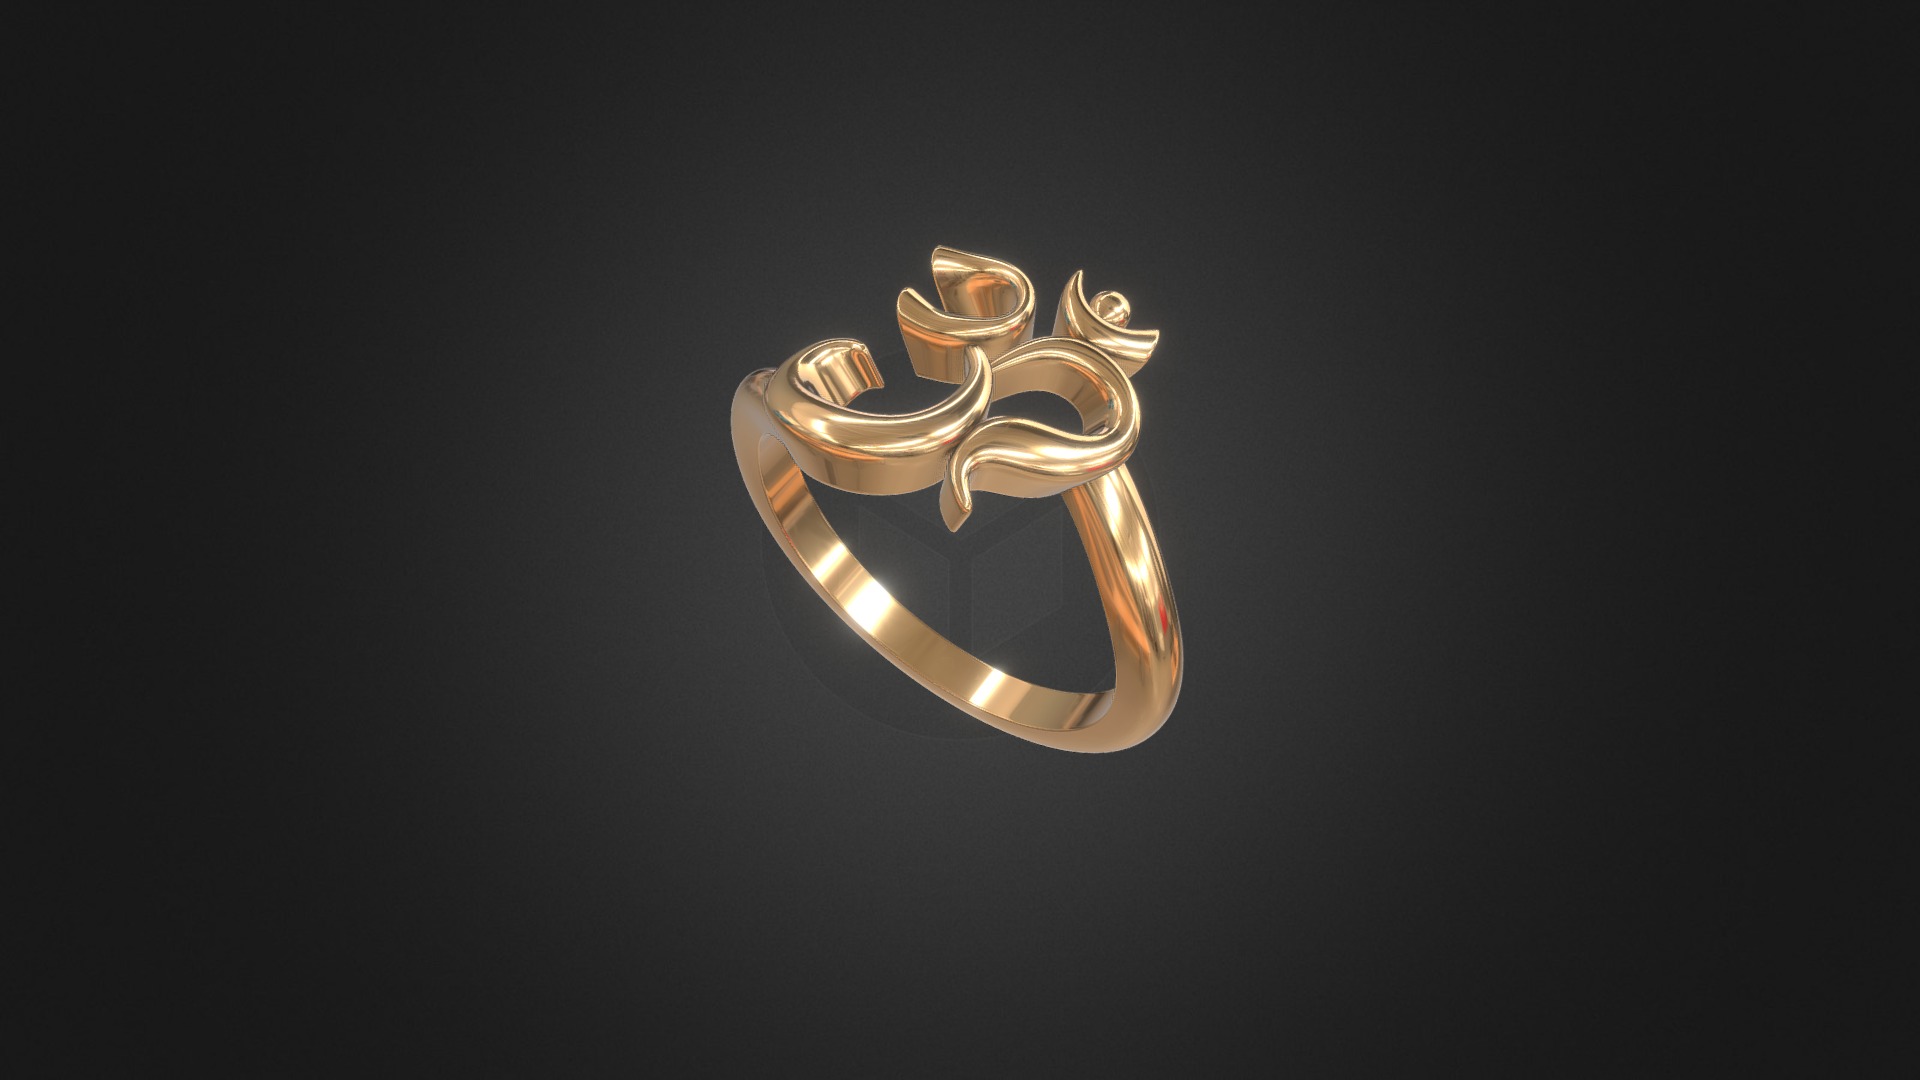 3D model 1143 – Ring - This is a 3D model of the 1143 - Ring. The 3D model is about a gold ring with diamonds.